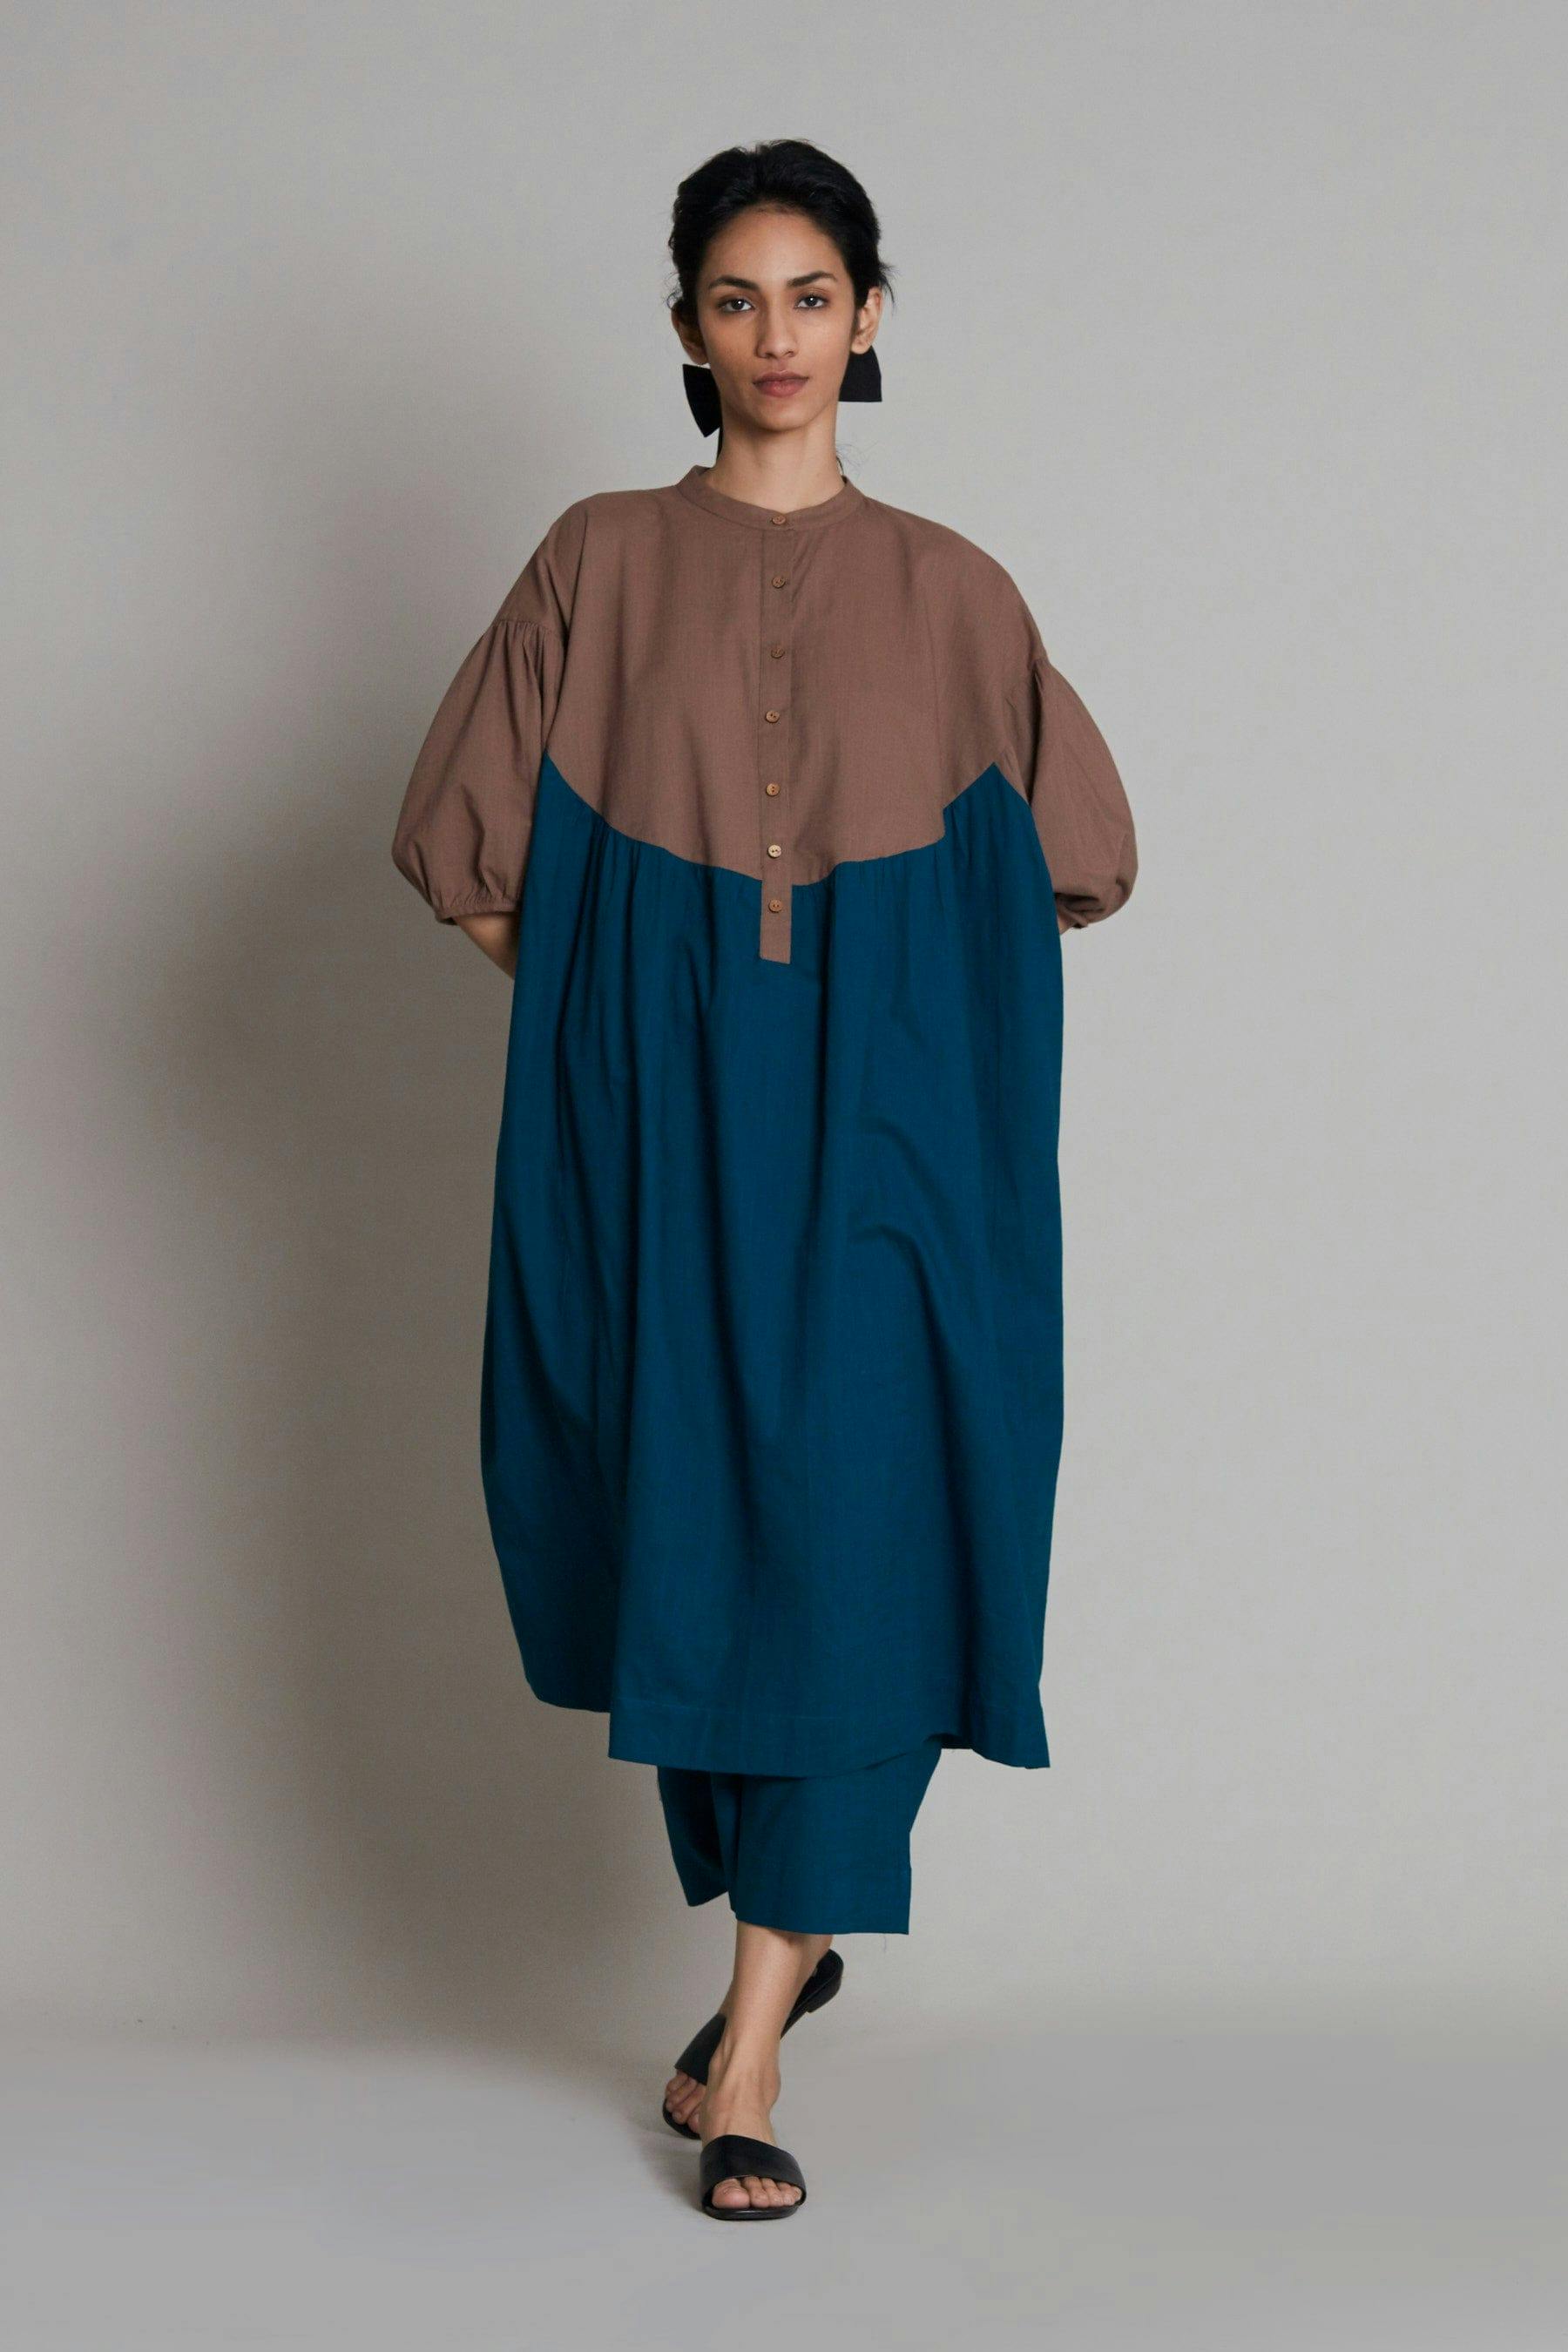 Thumbnail preview #0 for Beige & Teal Blue CB Acra Tunic Set